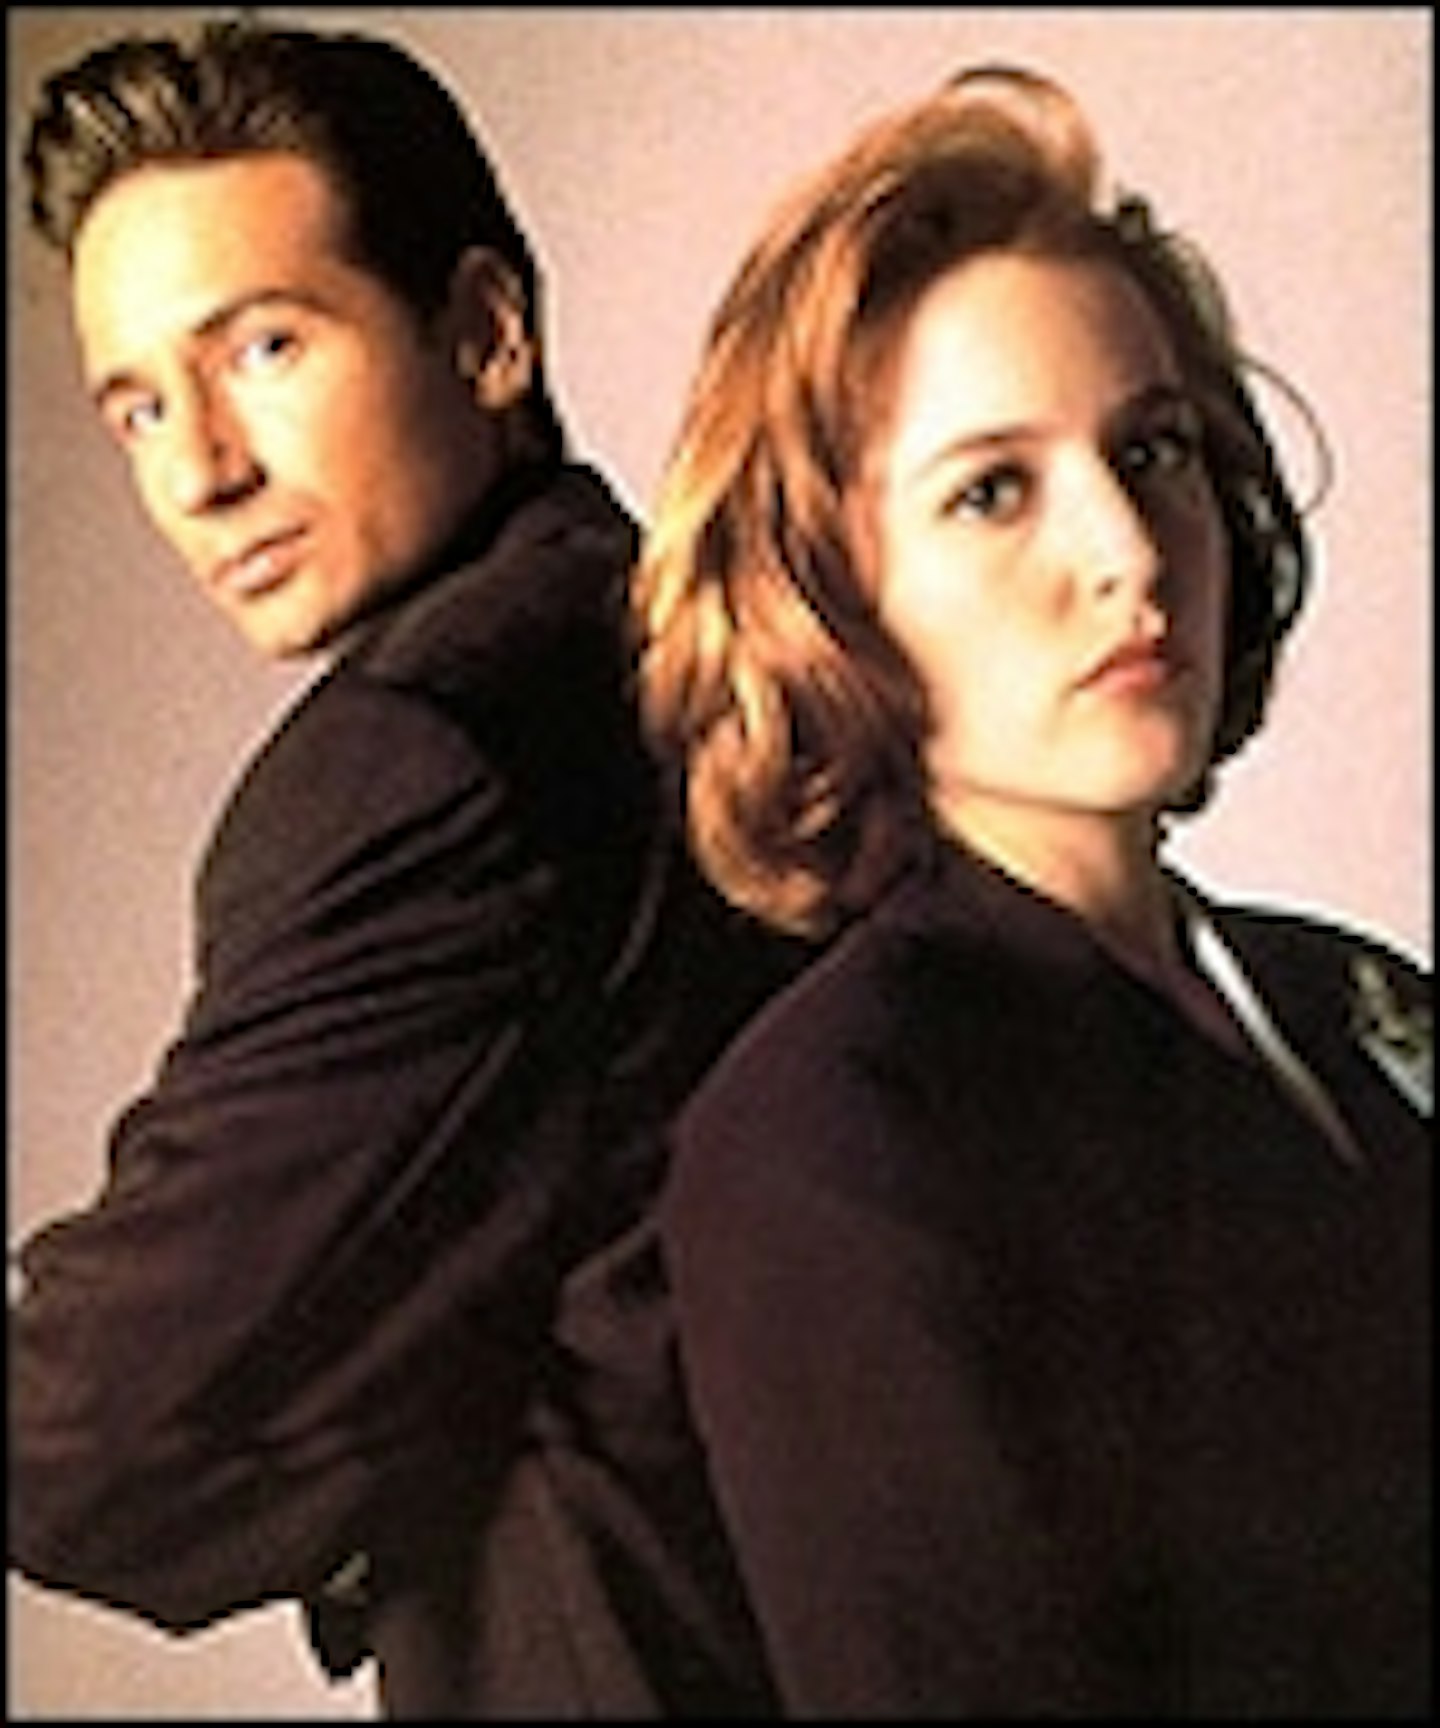 The X-Files 2 Confirmed!